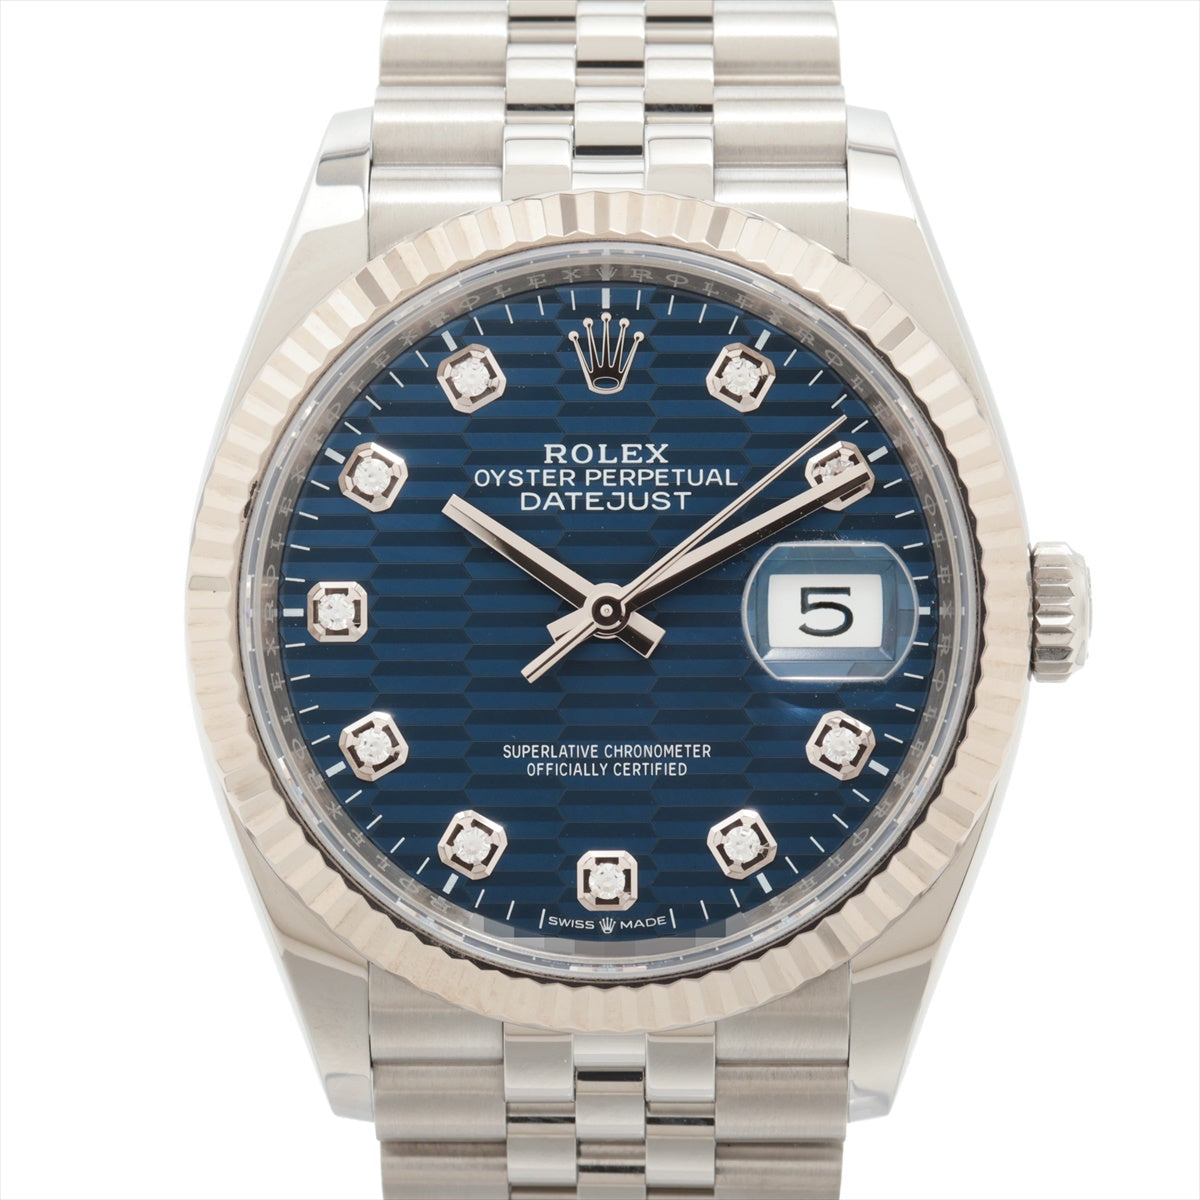 Rolex Datejust 126234G SS×WG AT blue fluted dial jubilee bracelet 2 Extra Links